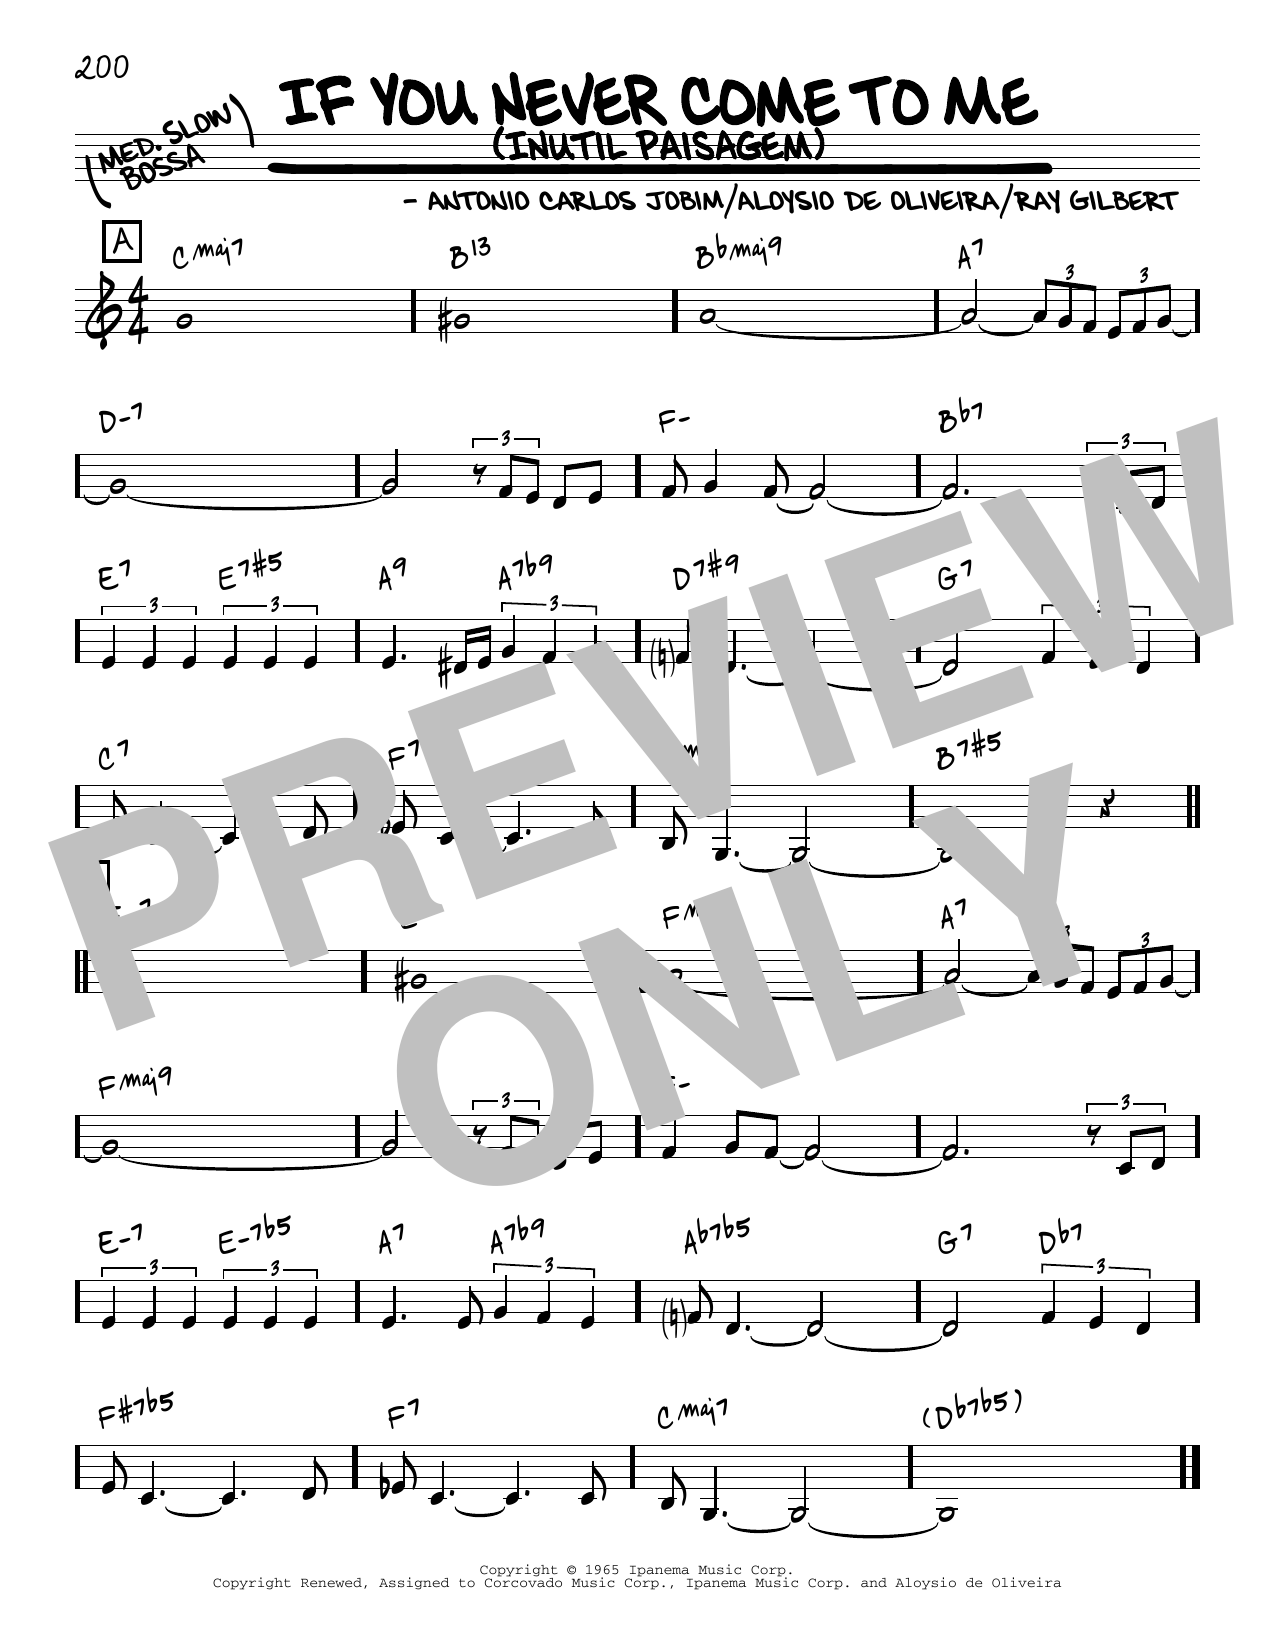 Download Antonio Carlos Jobim If You Never Come To Me (Inutil Paisage Sheet Music